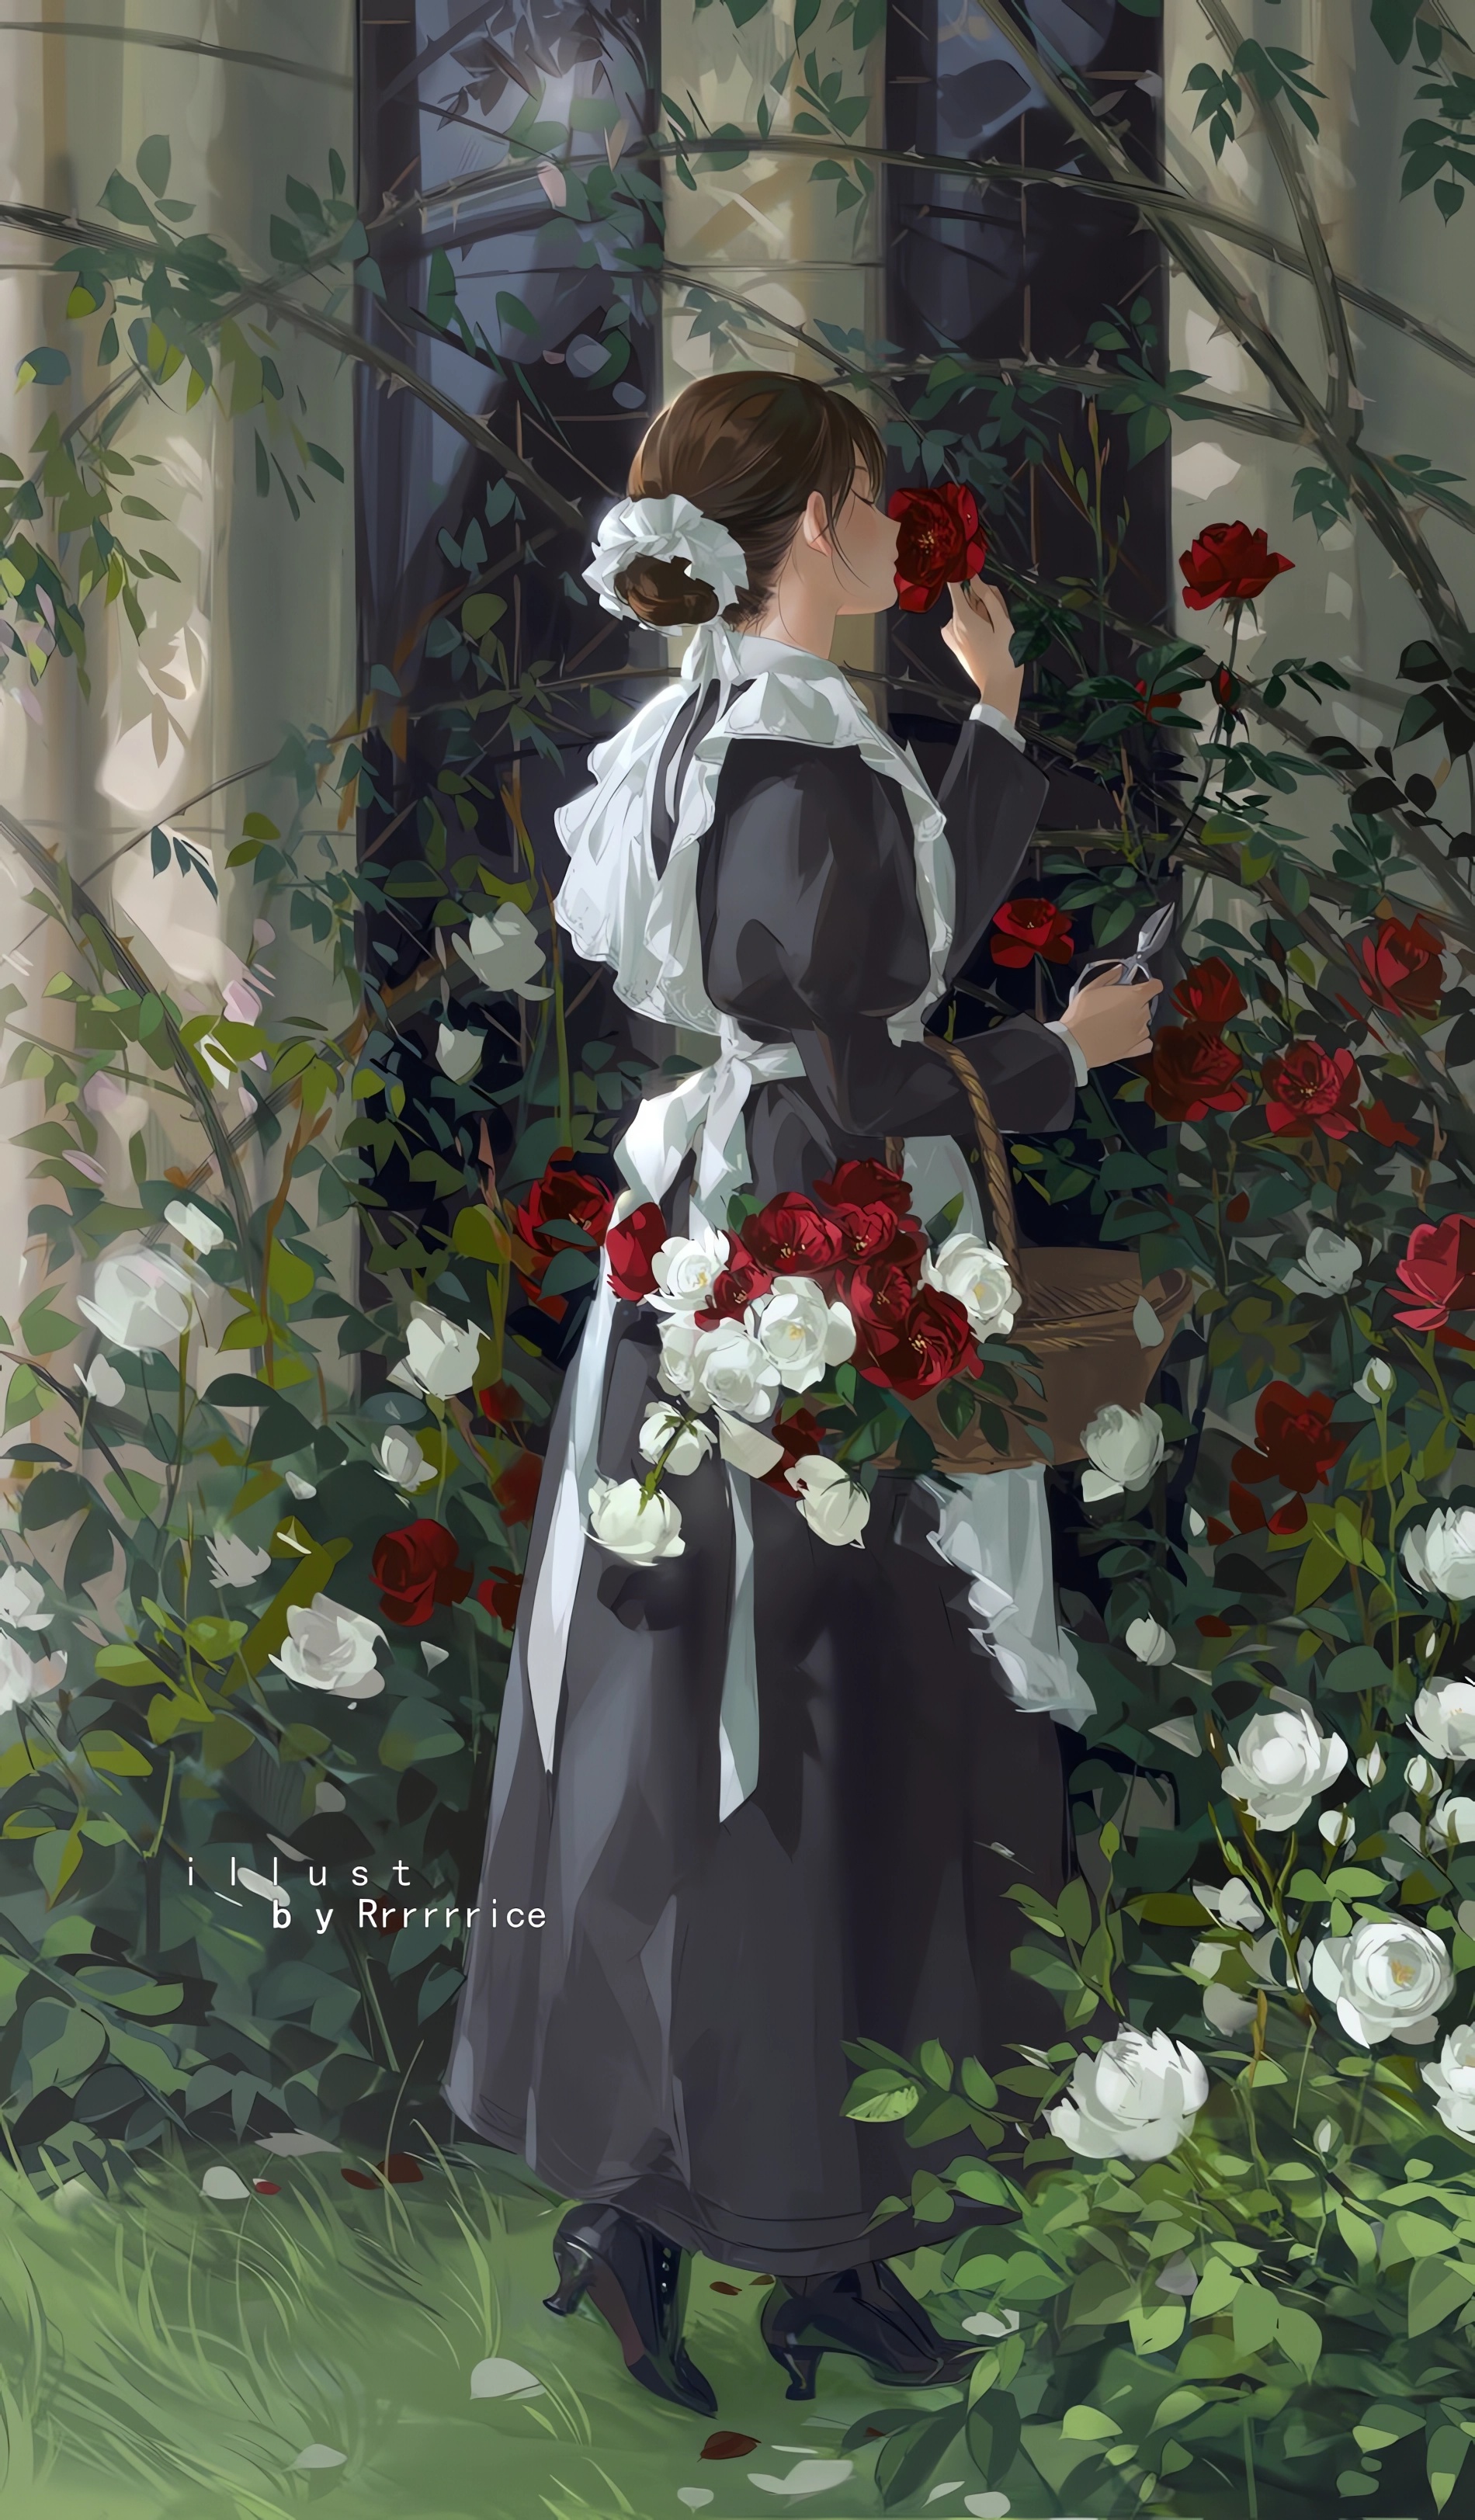 Anime 1900x3246 anime anime girls maid maid outfit leaves signature flowers grass heels standing portrait display rose baskets closed eyes scissors